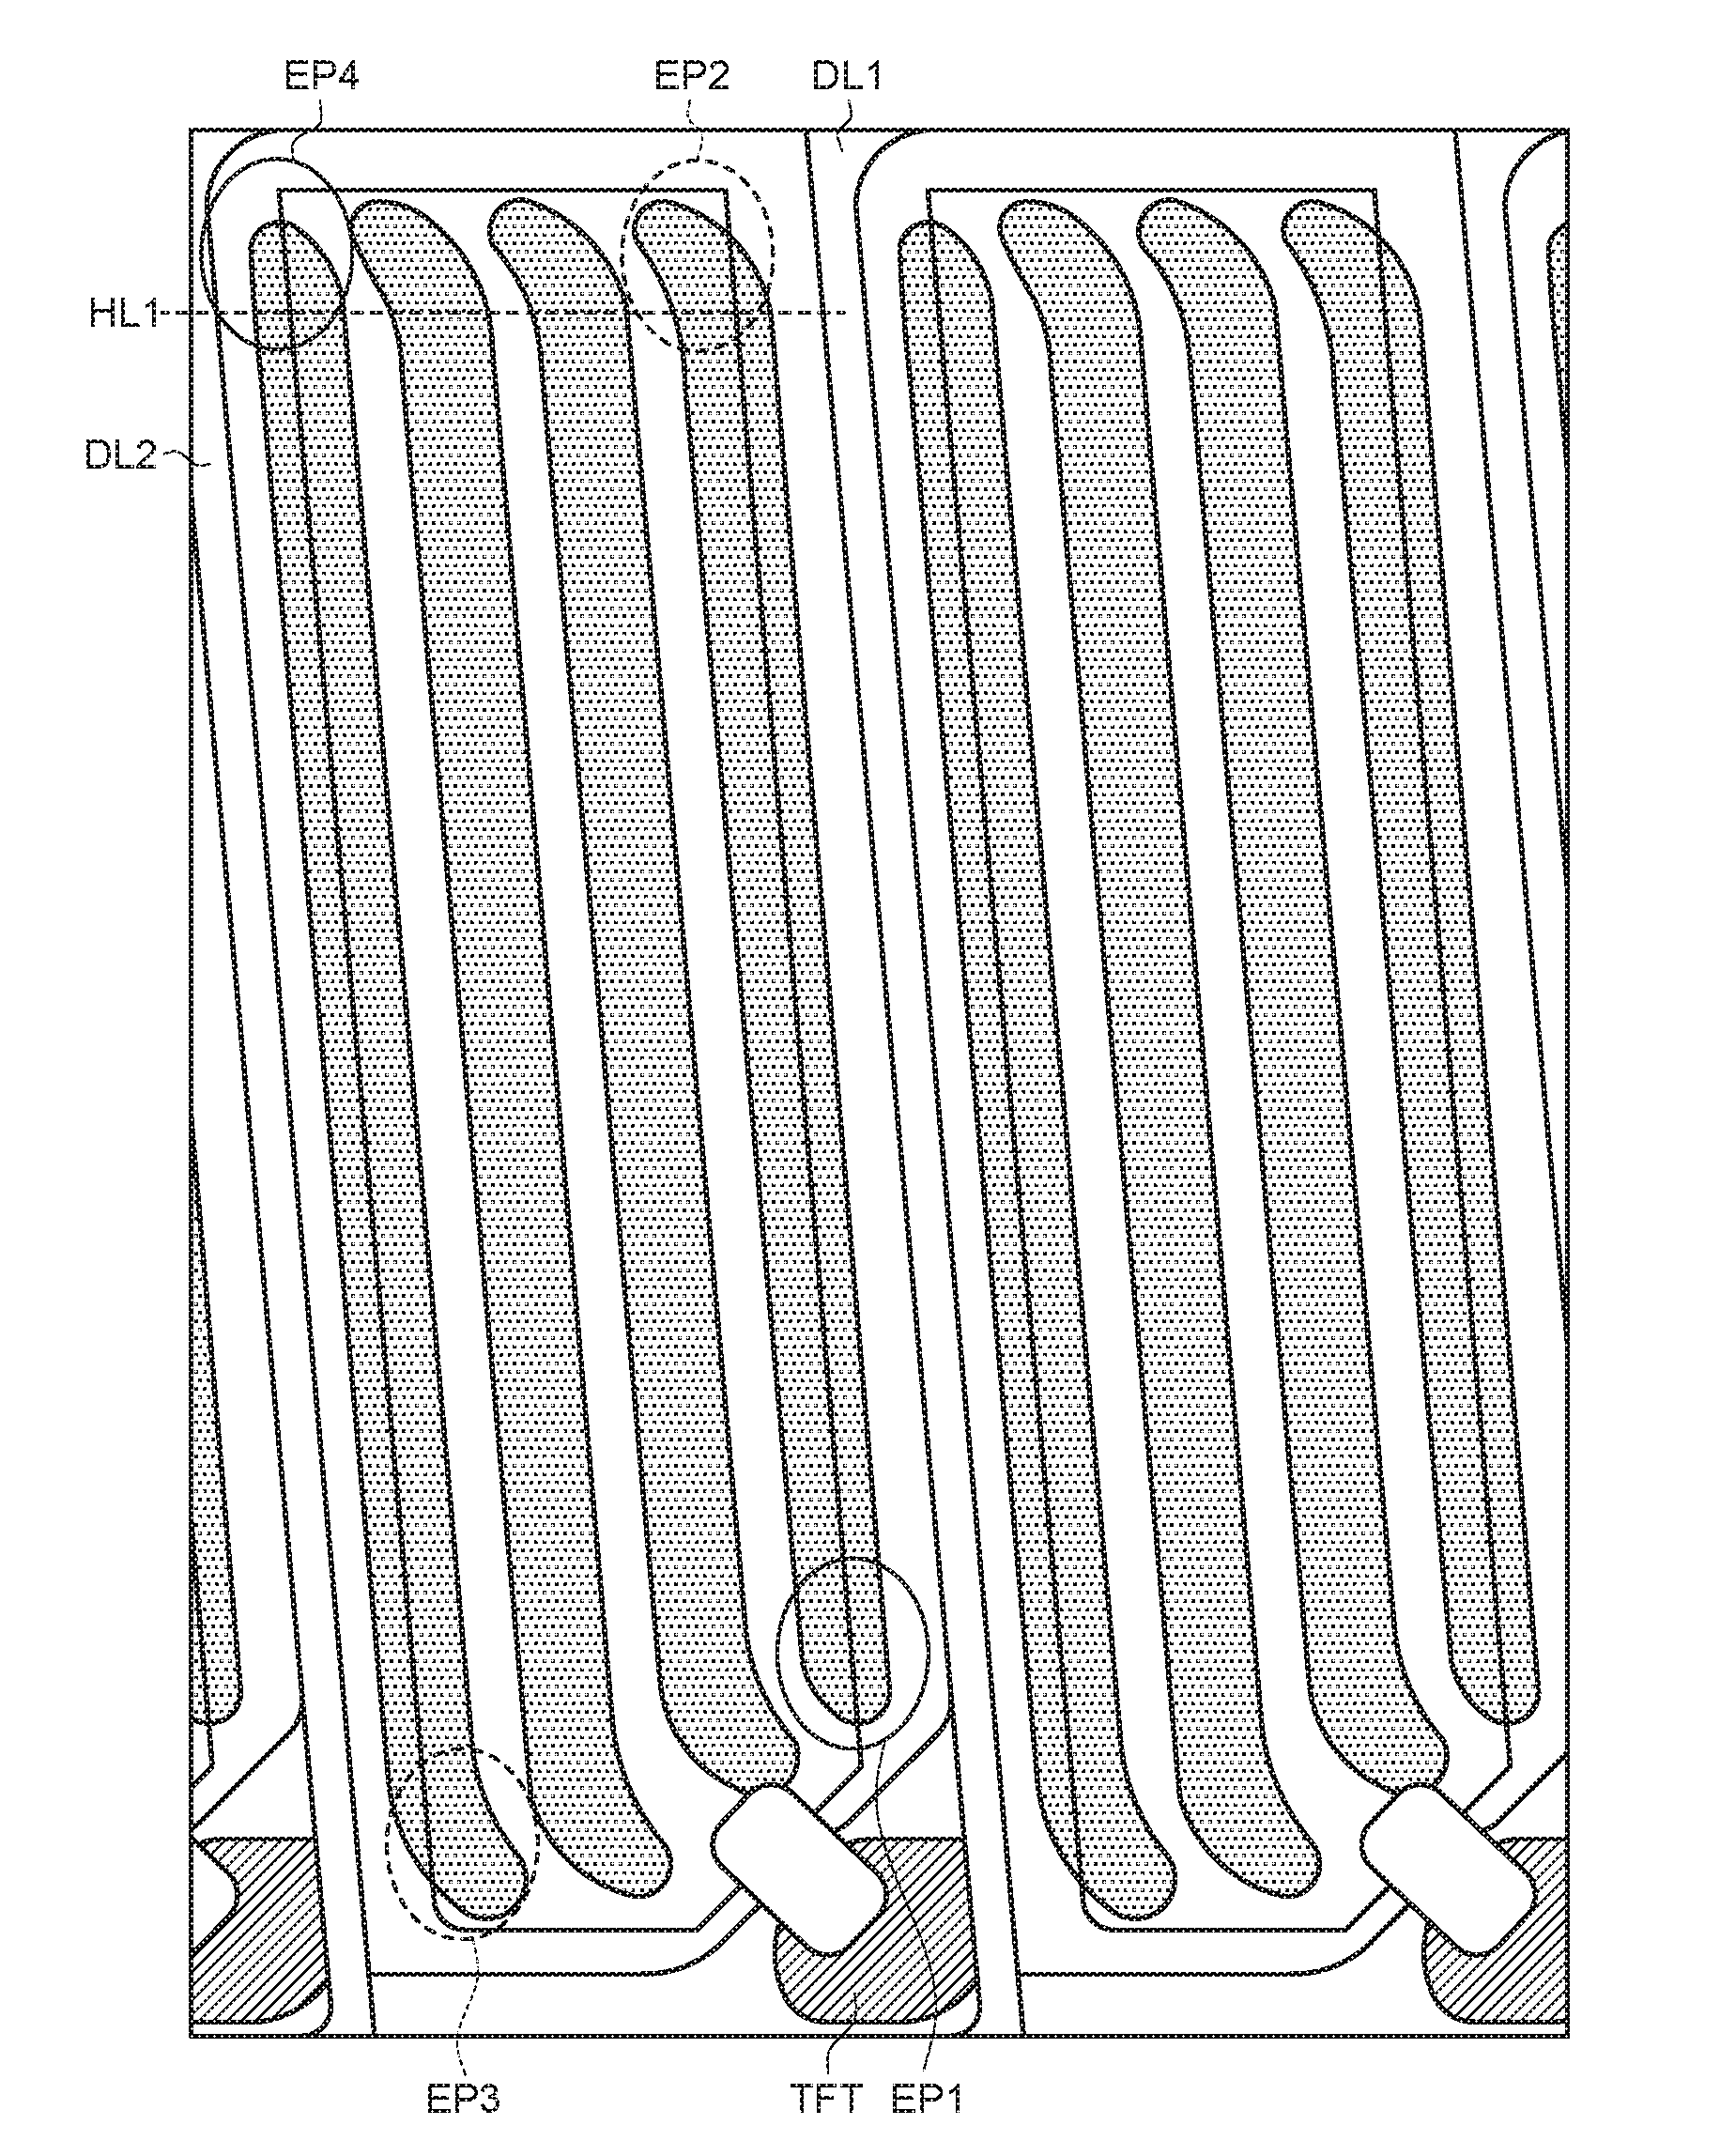 Display apparatus having pattern of slits on top-common electrode